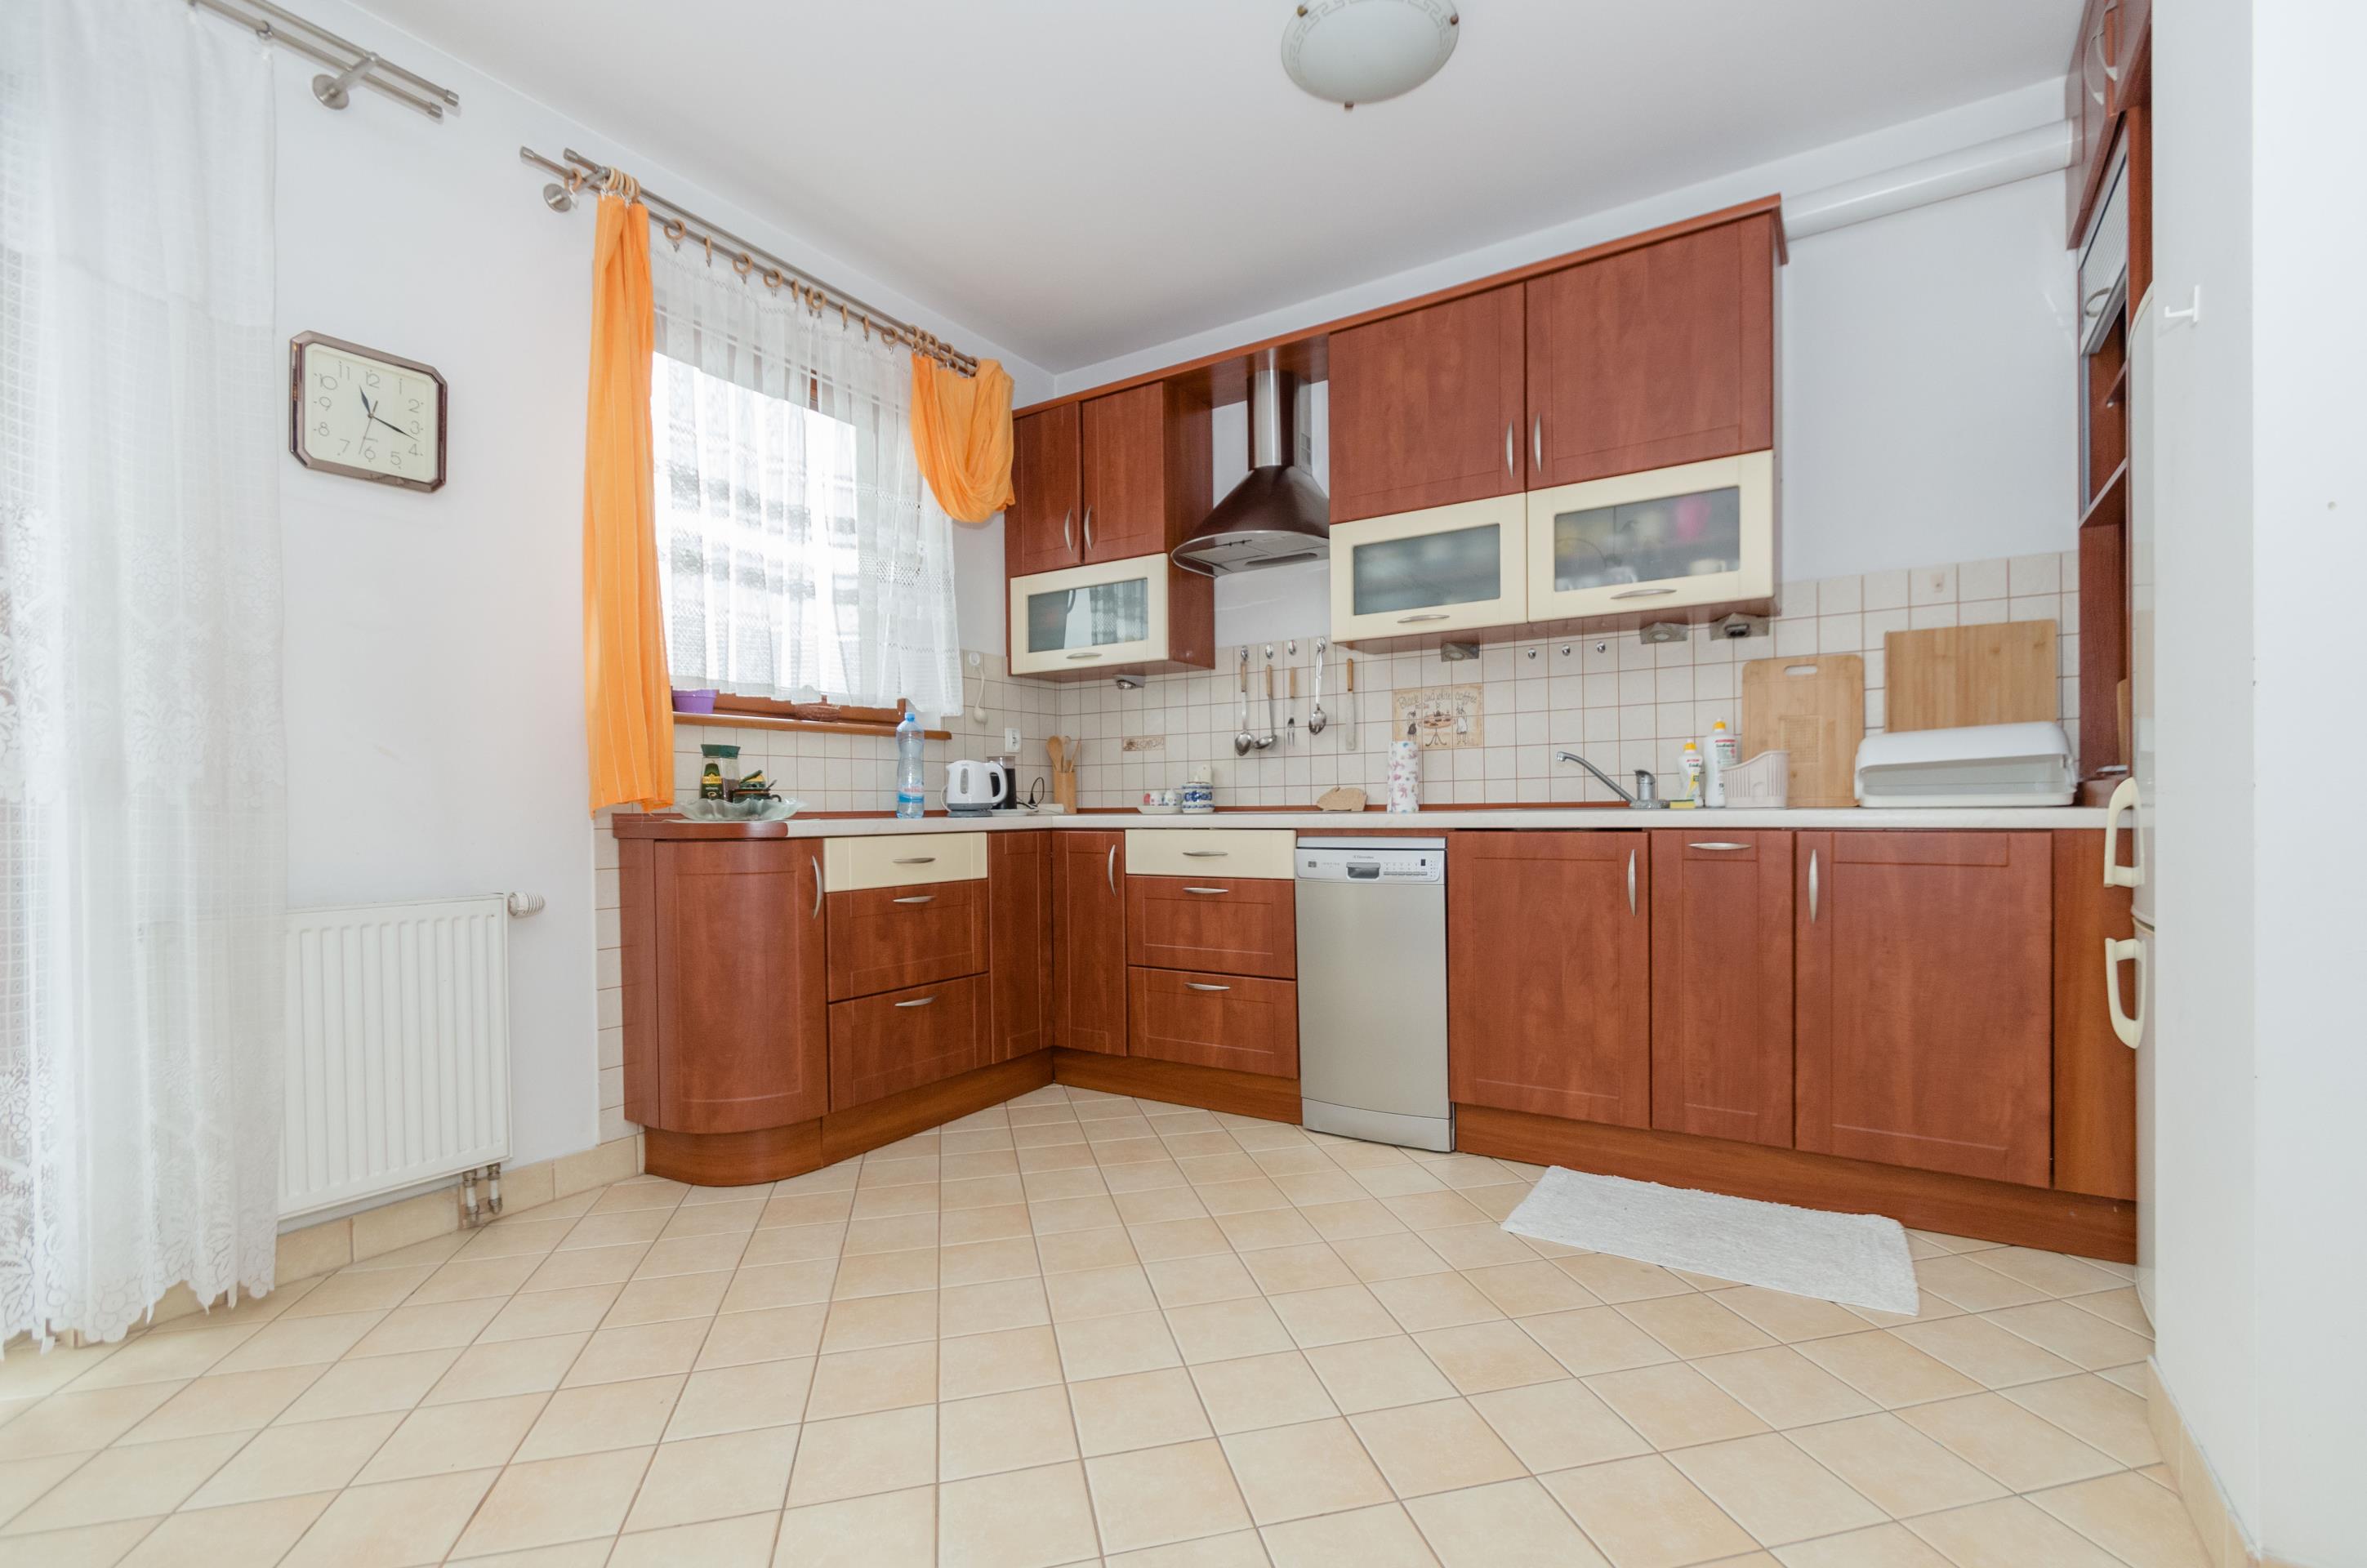 2 bedrooms apartment for rent